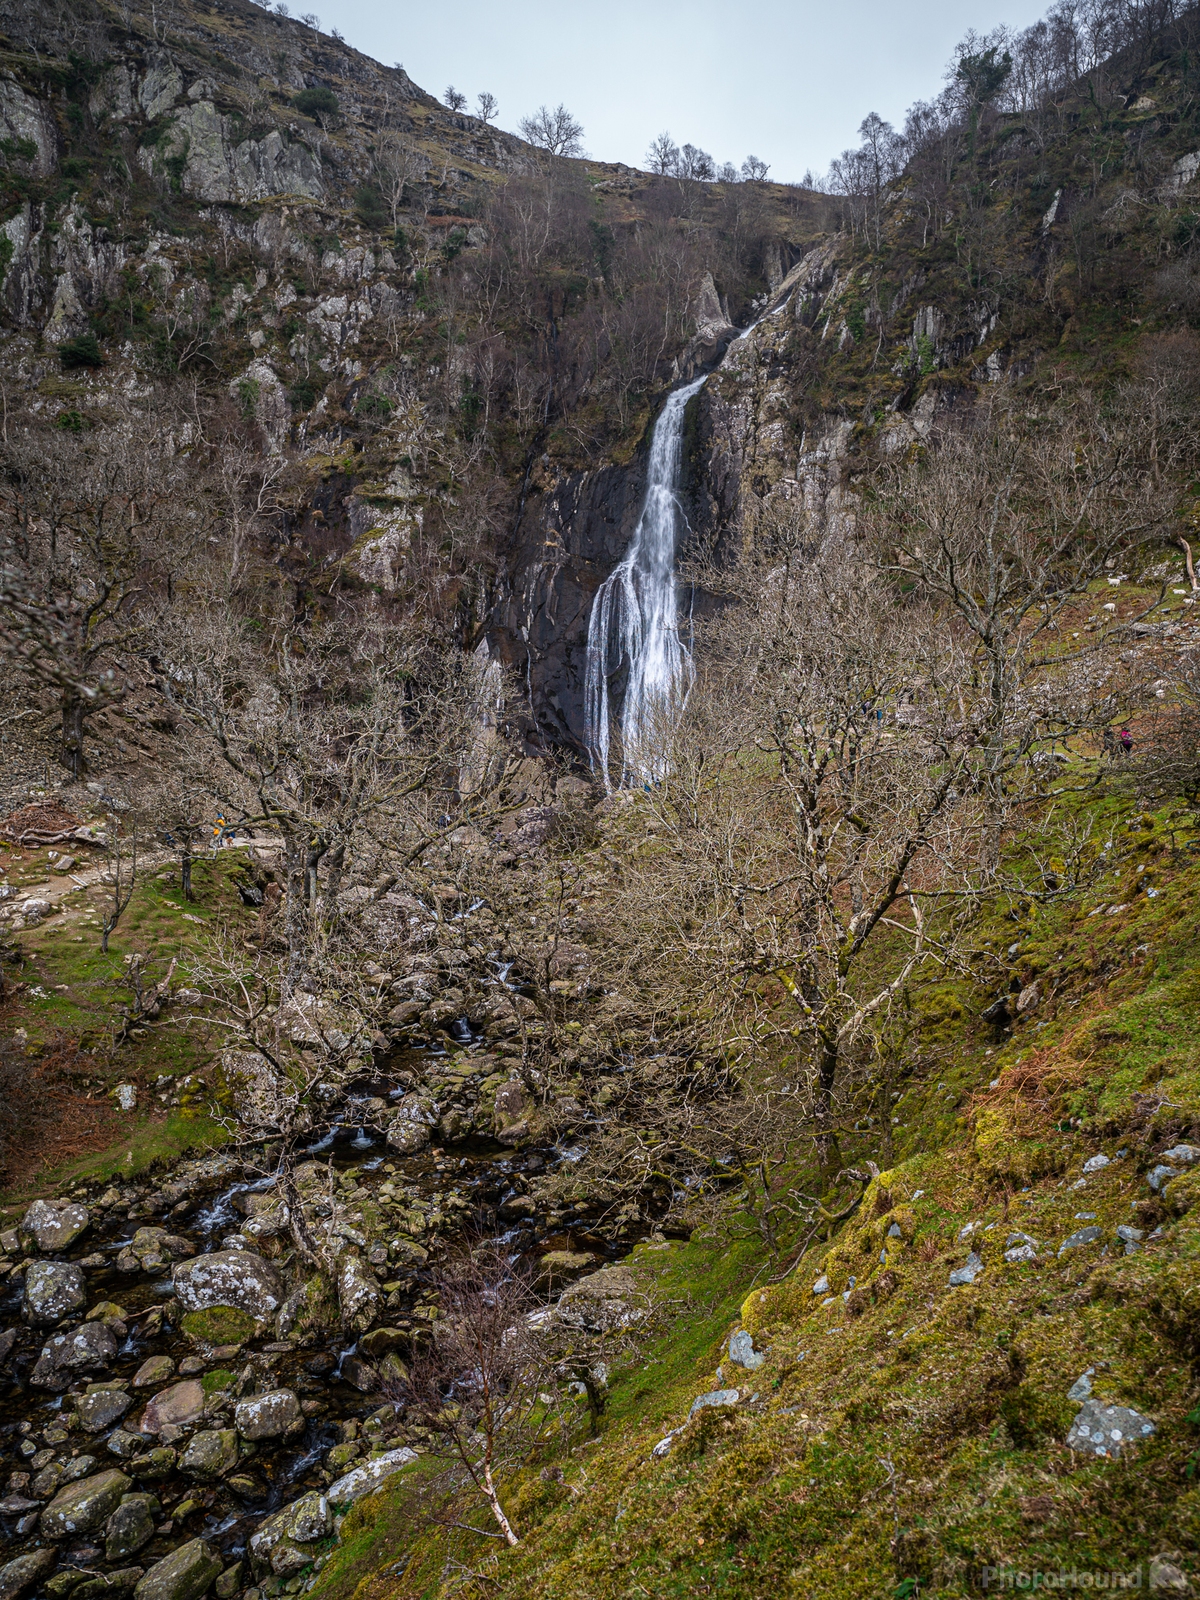 Image of Aber Falls by James Billings.